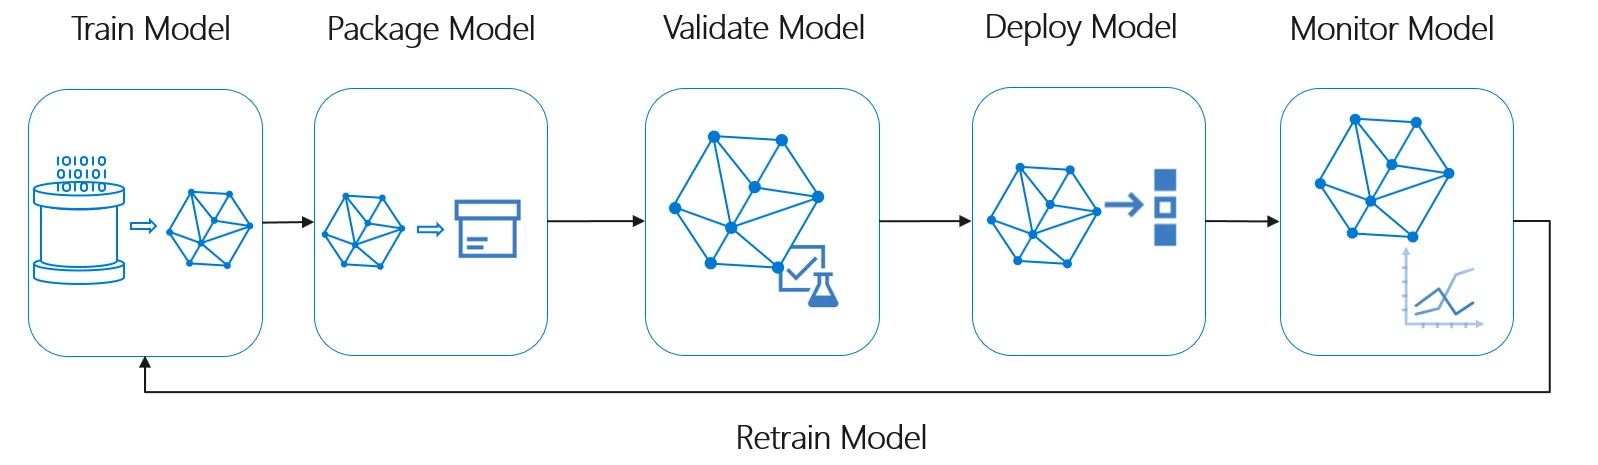 Operationalize models effeciently with MLOps